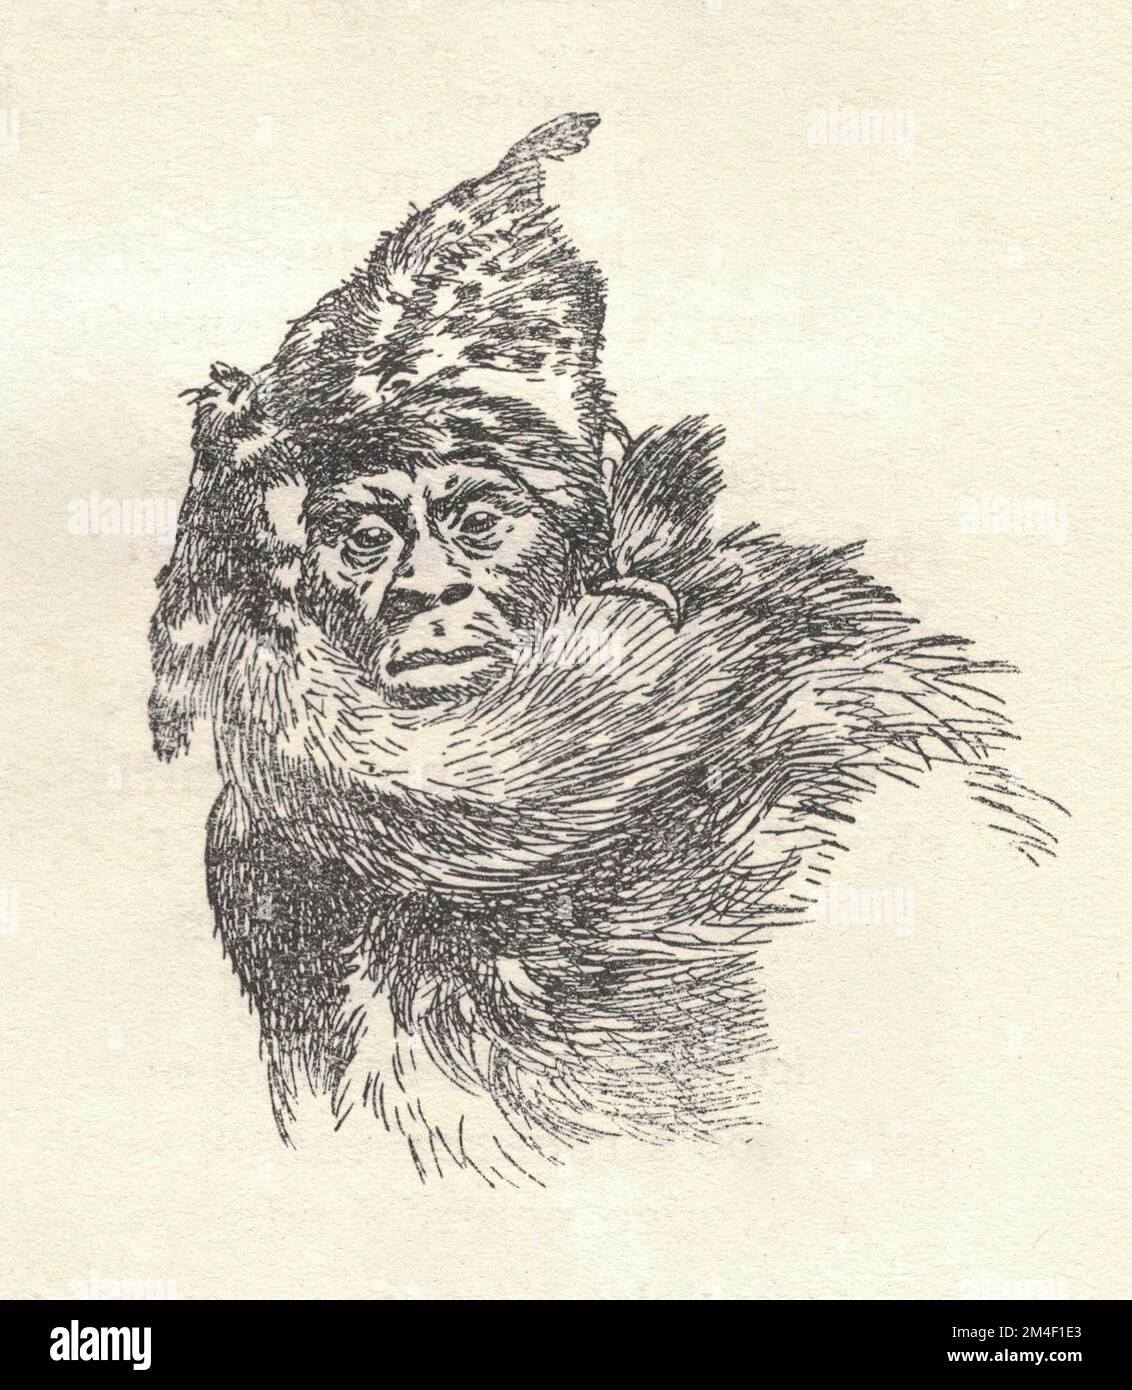 A prehistoric hunter dressed in furs. Depiction of a prehistoric animal. Old black and white illustration. Vintage drawing. Illustration by Zdenek Burian. Zdenek Michael Frantisek Burian (11 February 1905 in Koprivnice, Moravia, Austria-Hungary 1 July 1981 in Prague, Czechoslovakia) was a Czech painter, book illustrator and palaeoartist whose work played a central role in the development of palaeontological reconstruction. Originally recognised only in his native Czechoslovakia, Burian's fame later spread to an international audience during a remarkable career spanning six decades (1930s to 19 Stock Photo